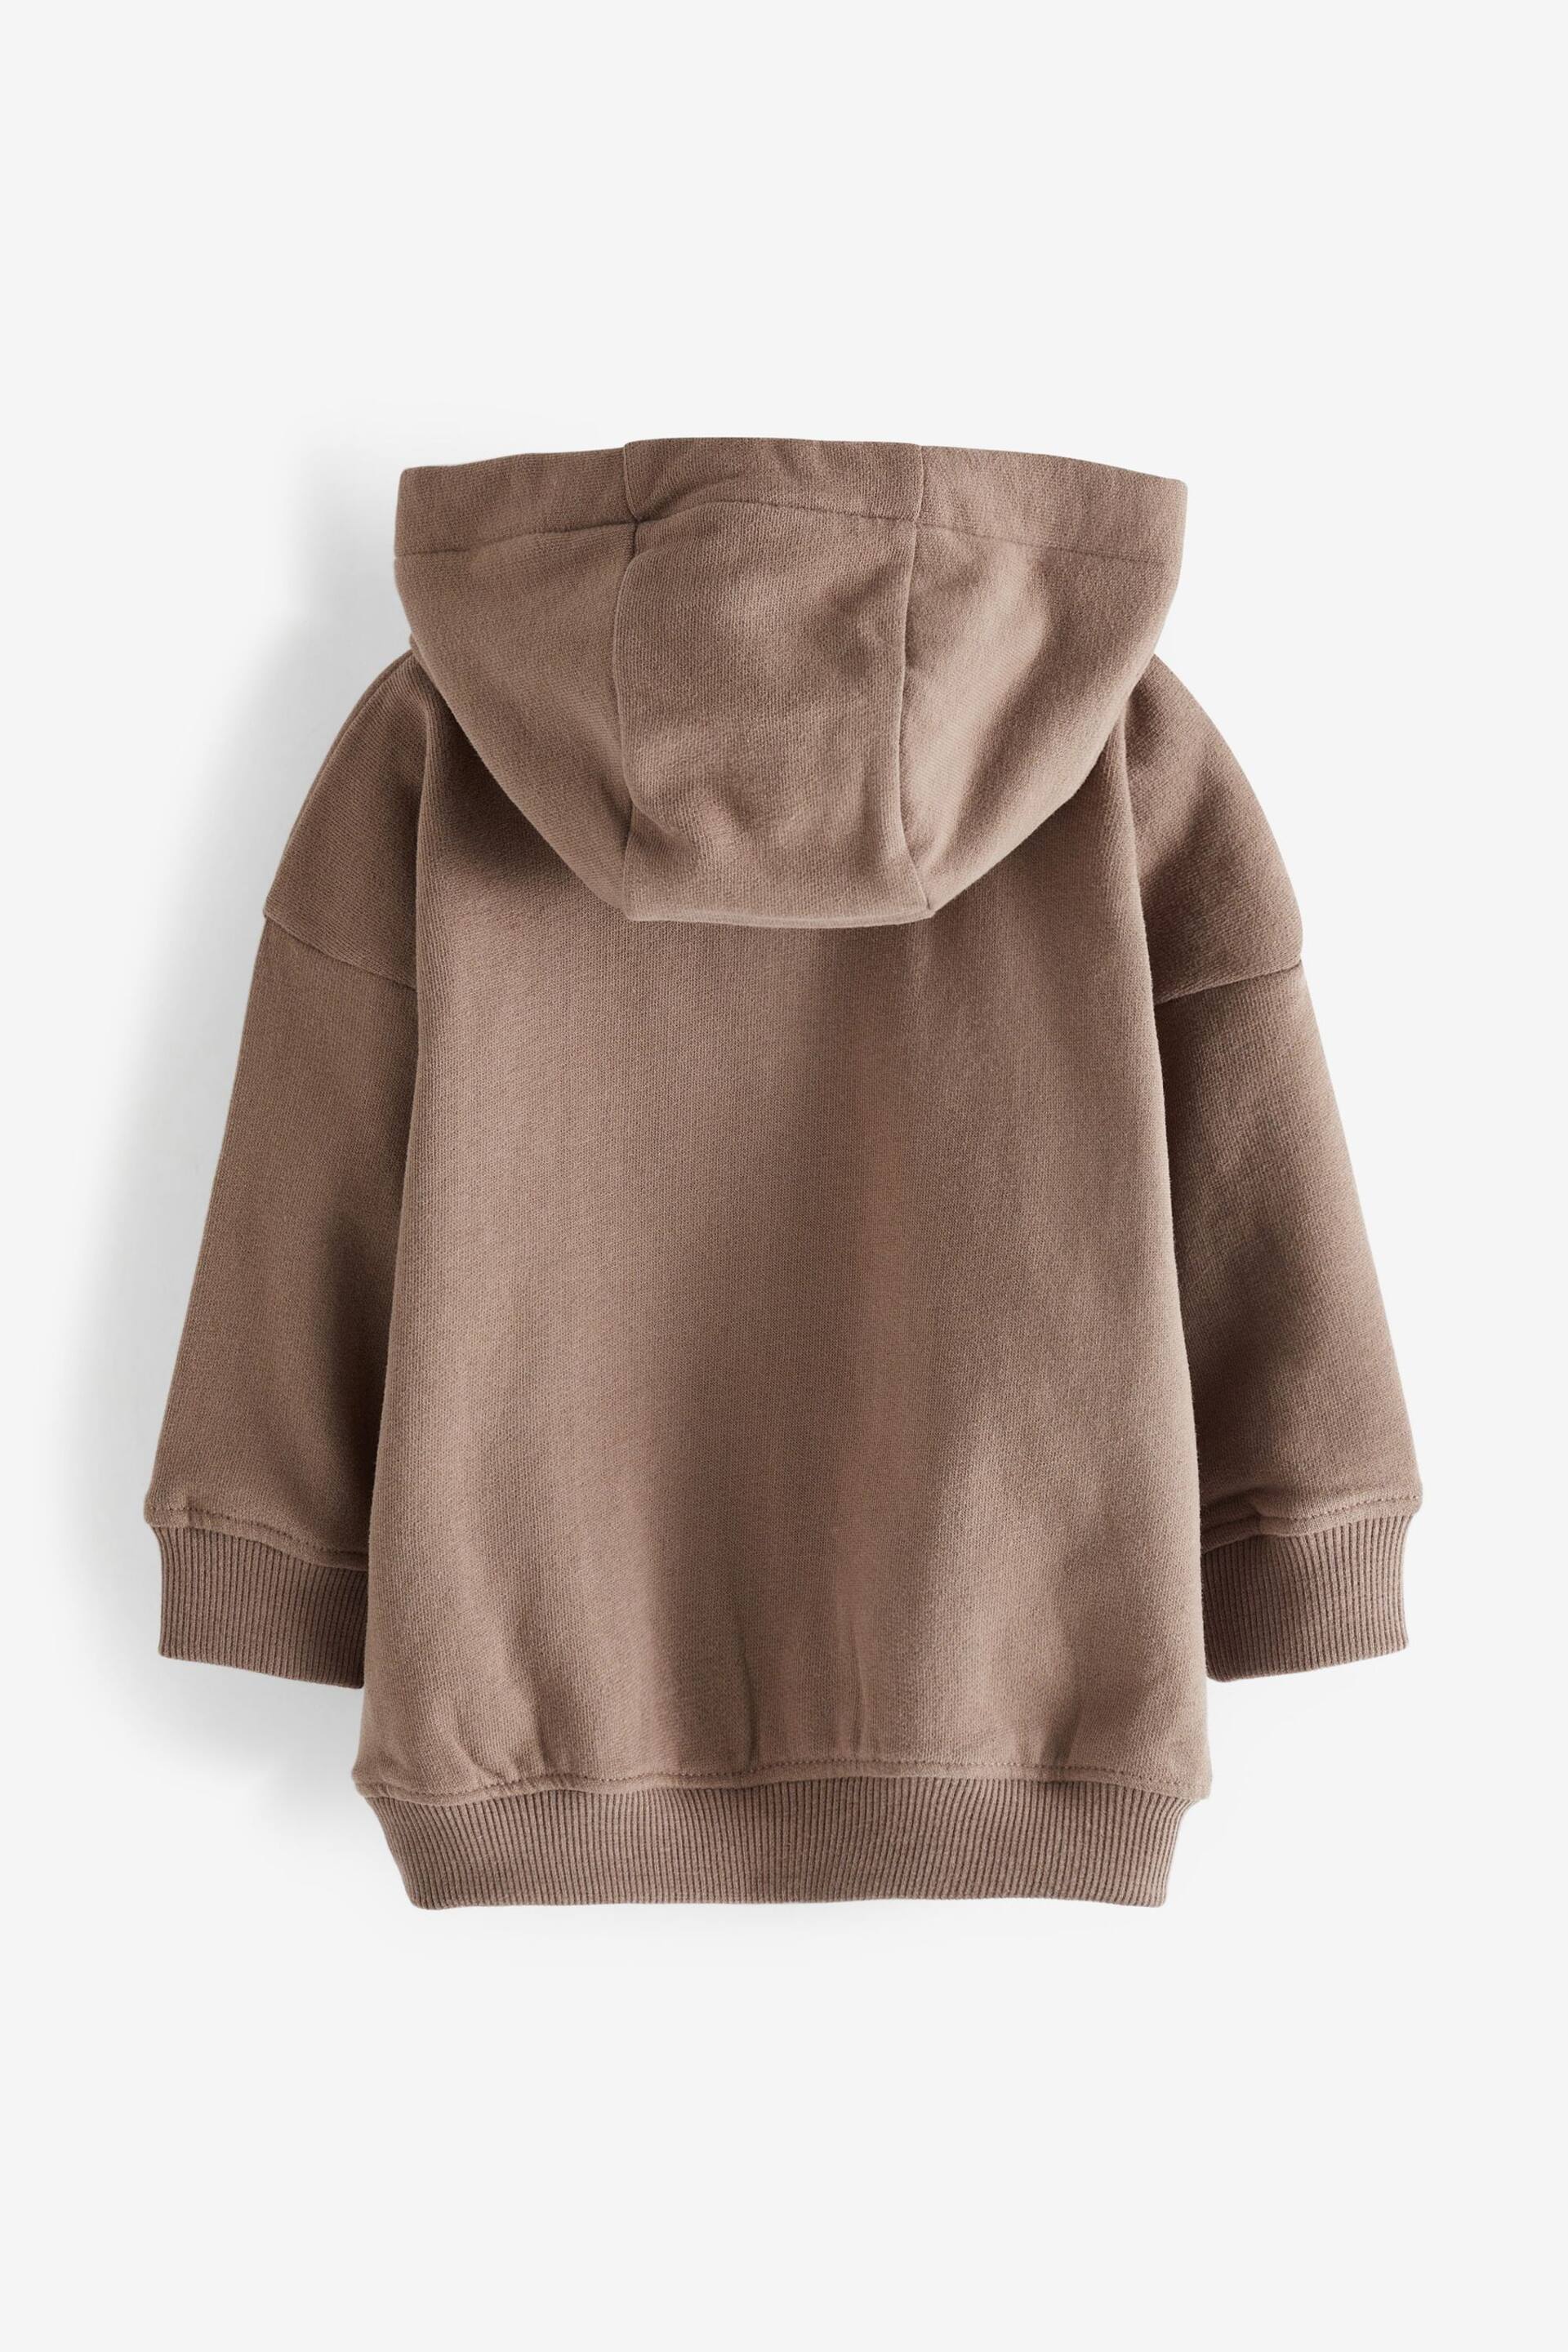 Mink Brown Soft Touch Jersey Hoodie (3mths-7yrs) - Image 6 of 7